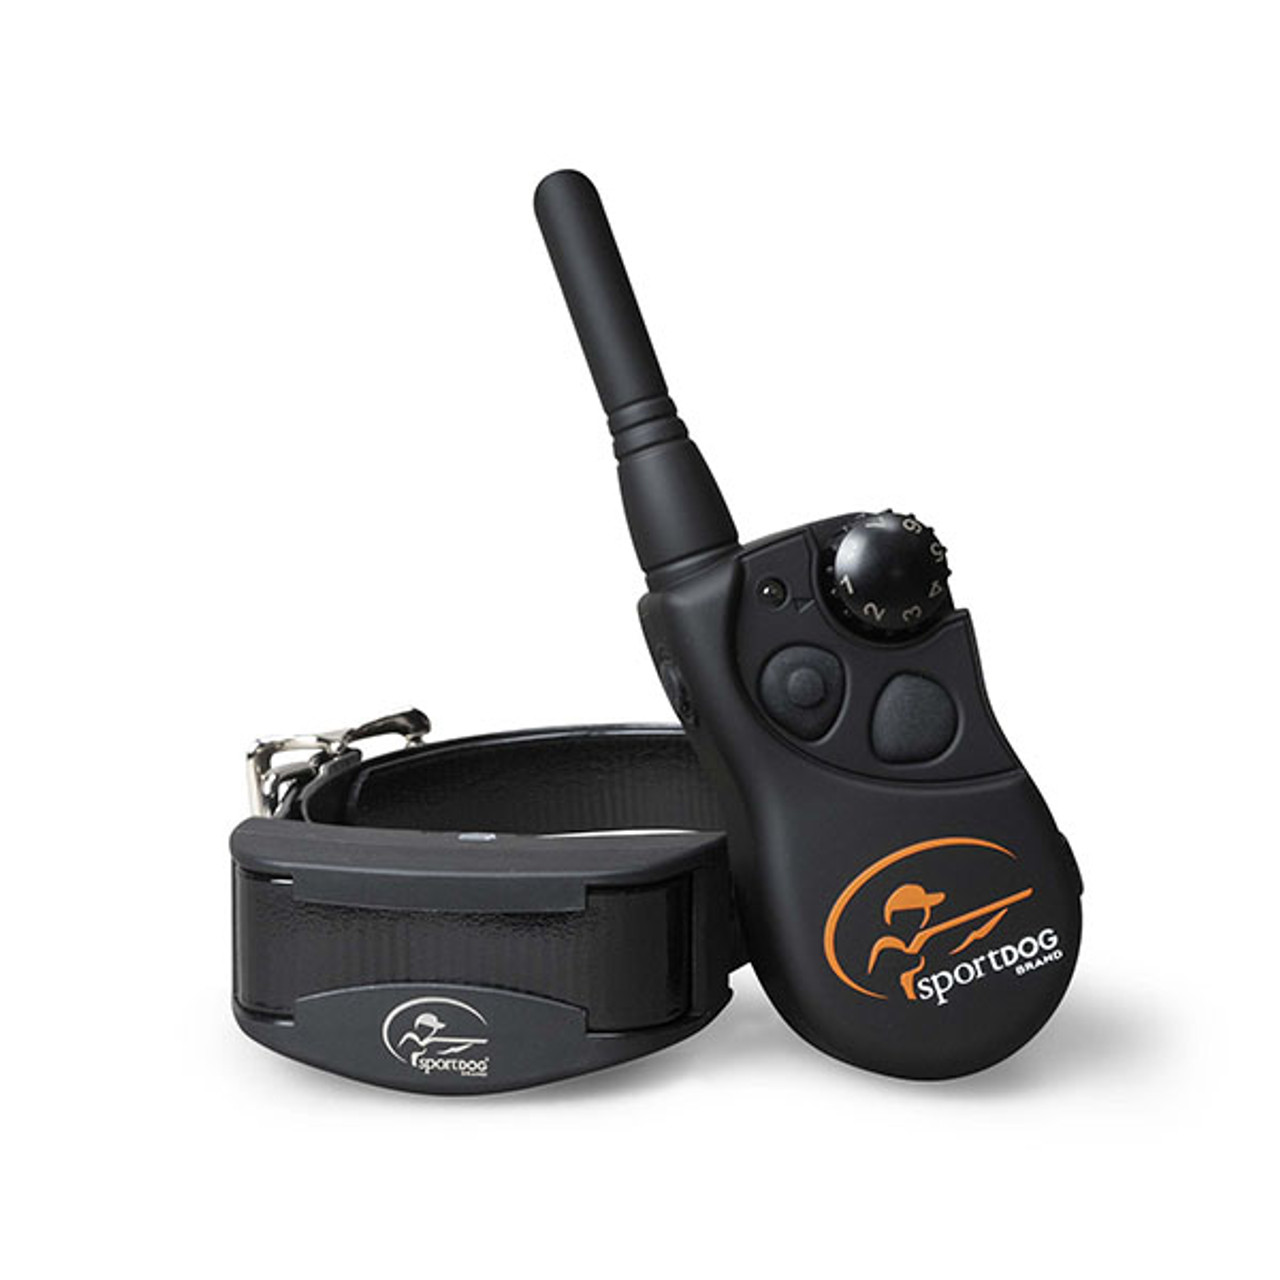 he SportDOG Brand YardTrainer 100 is designed for basic obedience training around the house, yard, or park - any situation where your dog is within 100 yards of you.